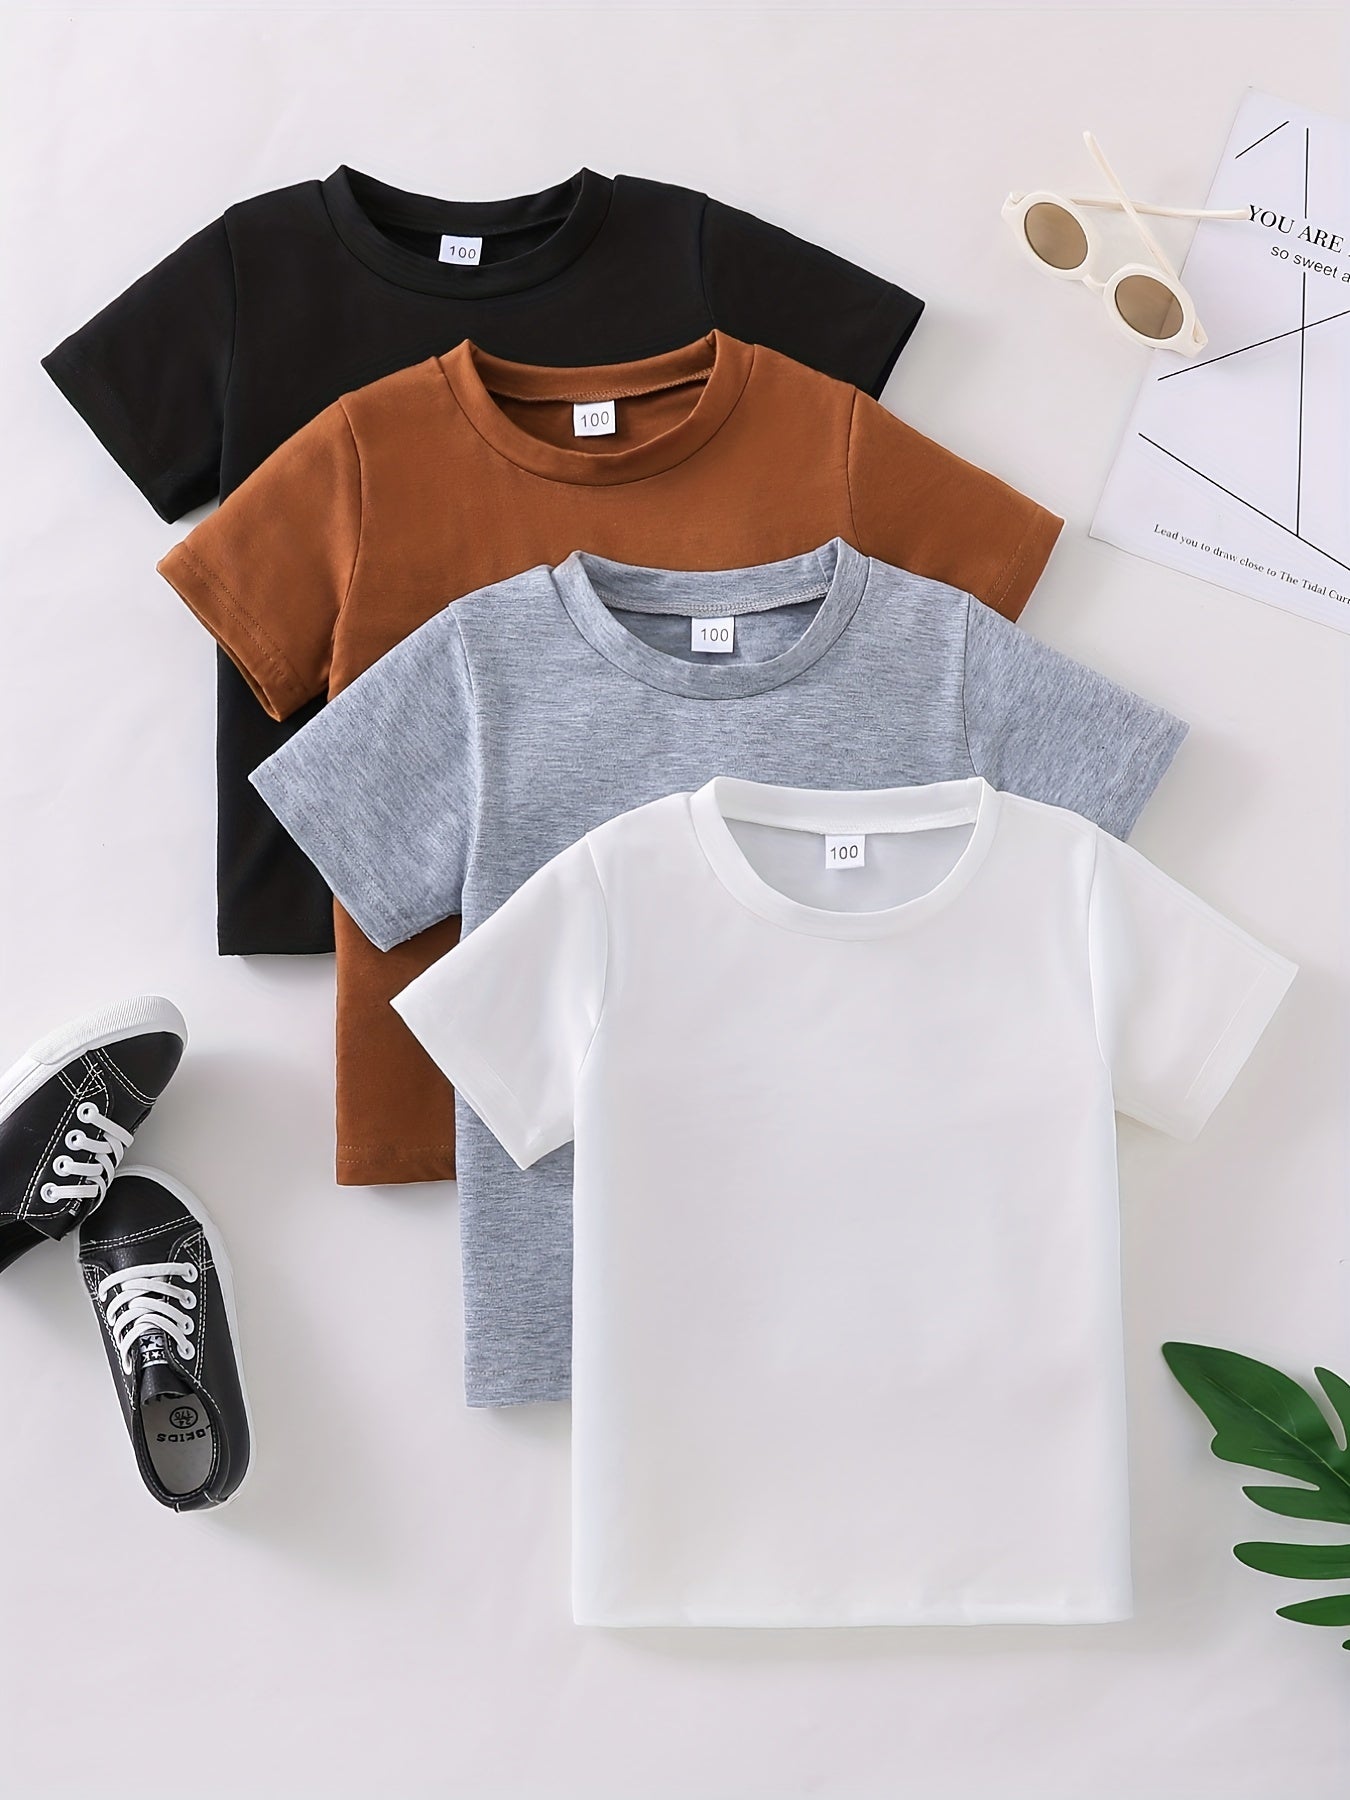 4 Pack Solid Color Boys Creative T-shirt, Casual Lightweight Comfy Short Sleeve Crew Neck Tee Tops, Kids Clothings For Summer